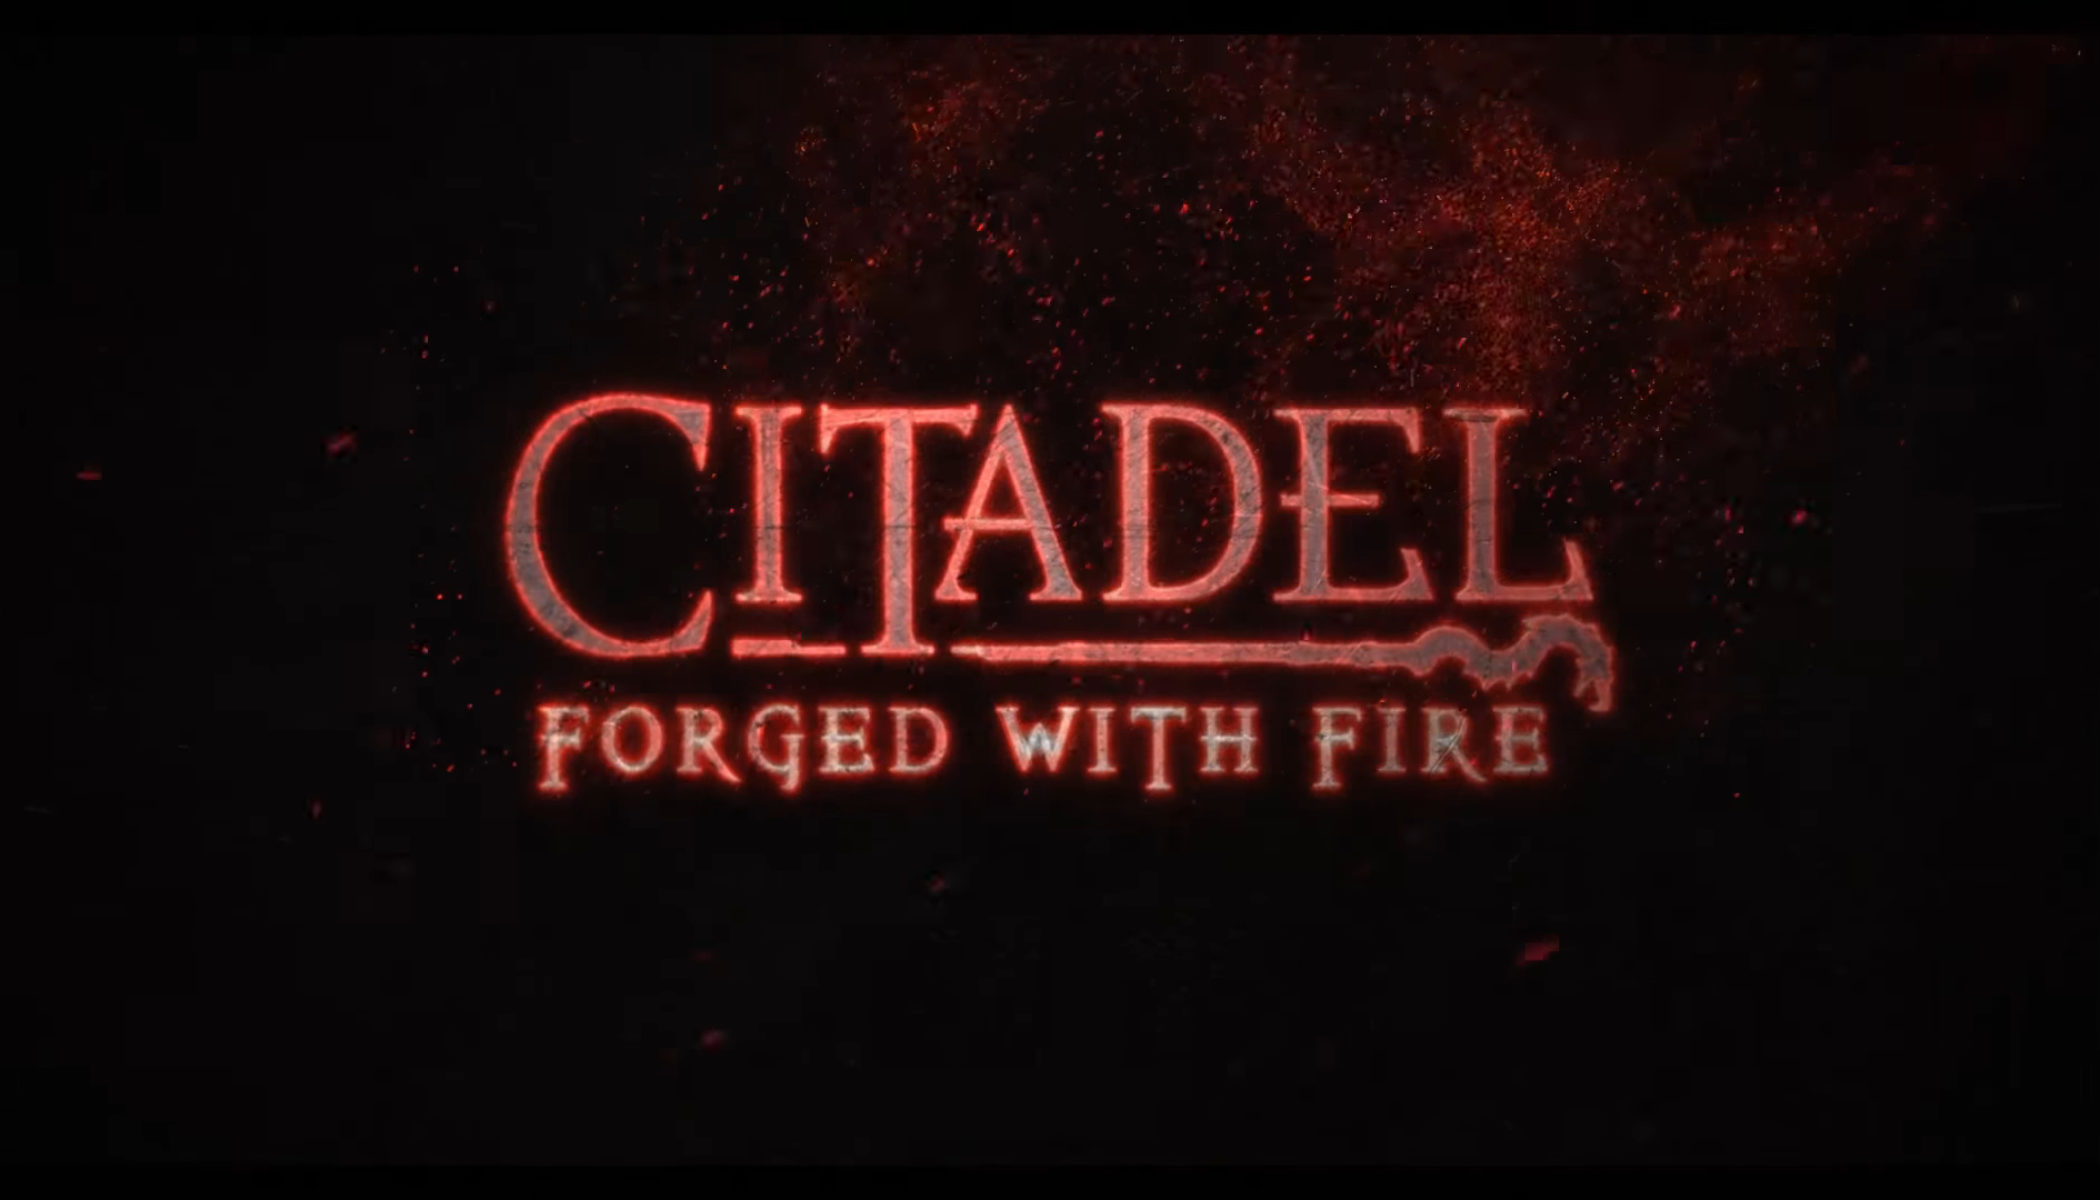 Citadel: Forged With Fire, Blue Isle Studios, PlayStation 4